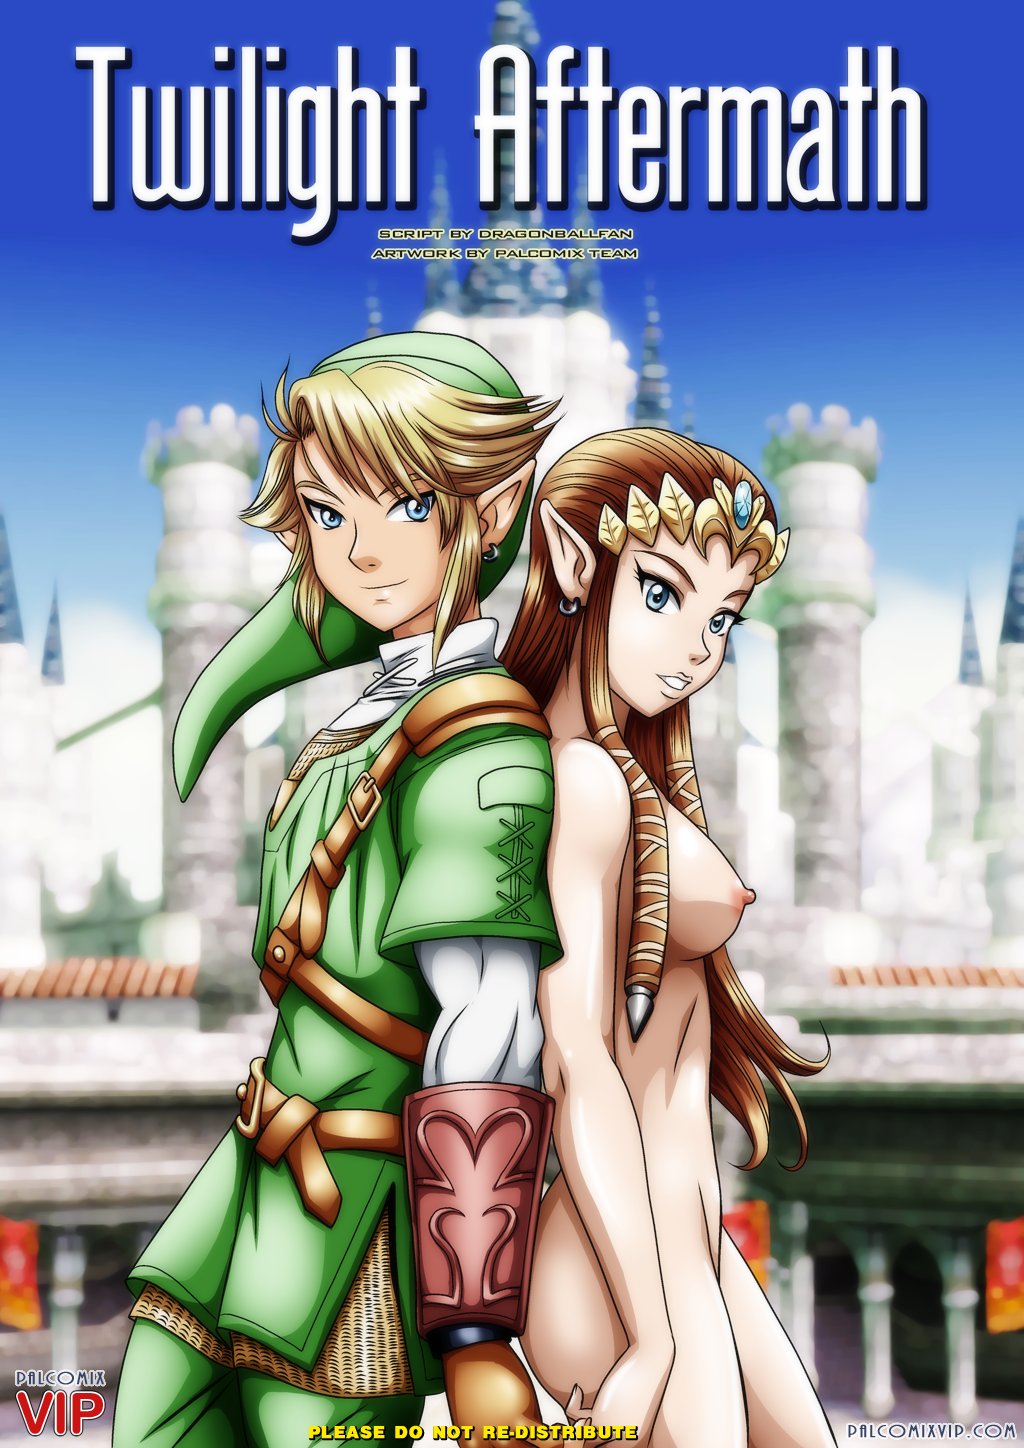 blush breasts clothed_male_nude_female comic link palcomix princess_zelda tagme the_legend_of_zelda twilight_aftermath twilight_princess zelda